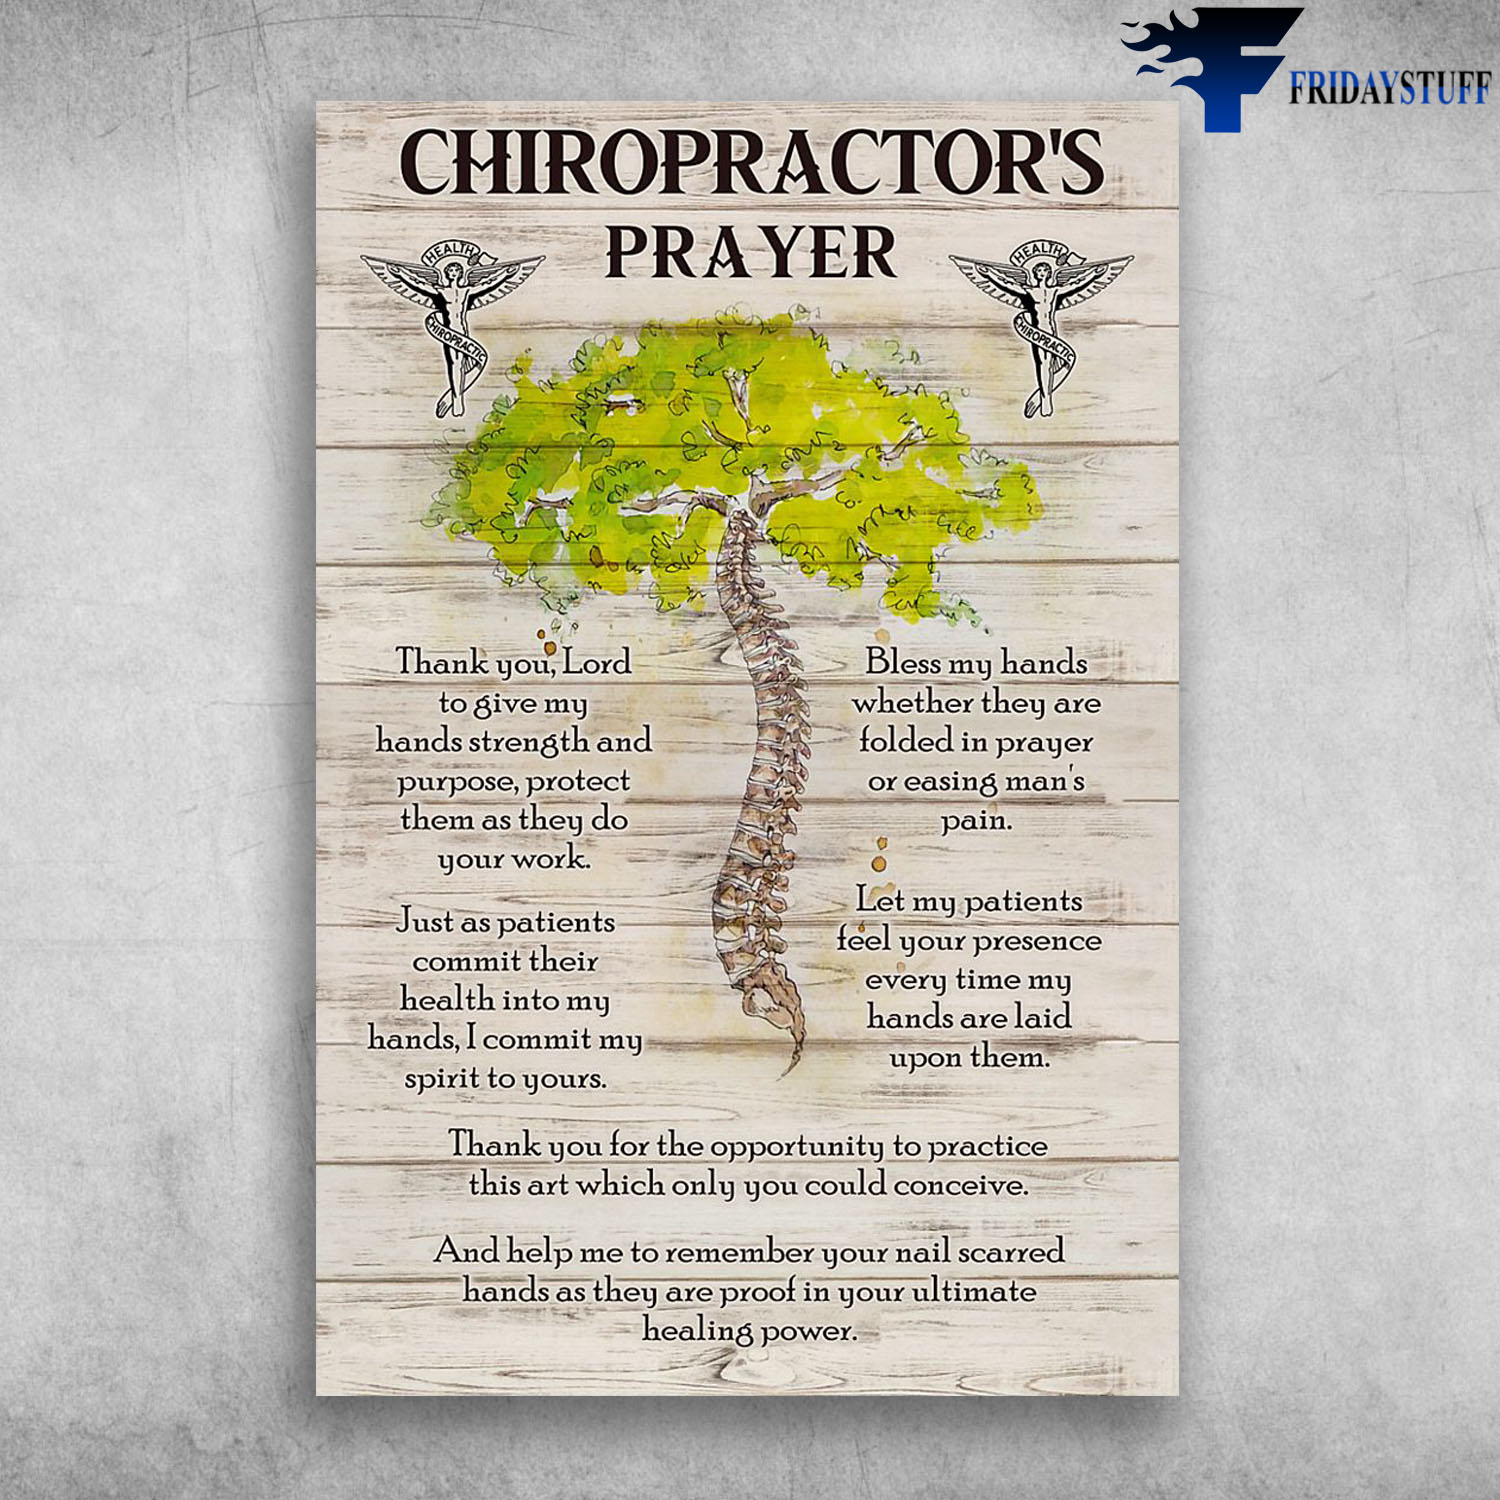 Human Spine Tree Chiropractor's Prayer Thank You Lord To Give My Hands Strength And Purpose